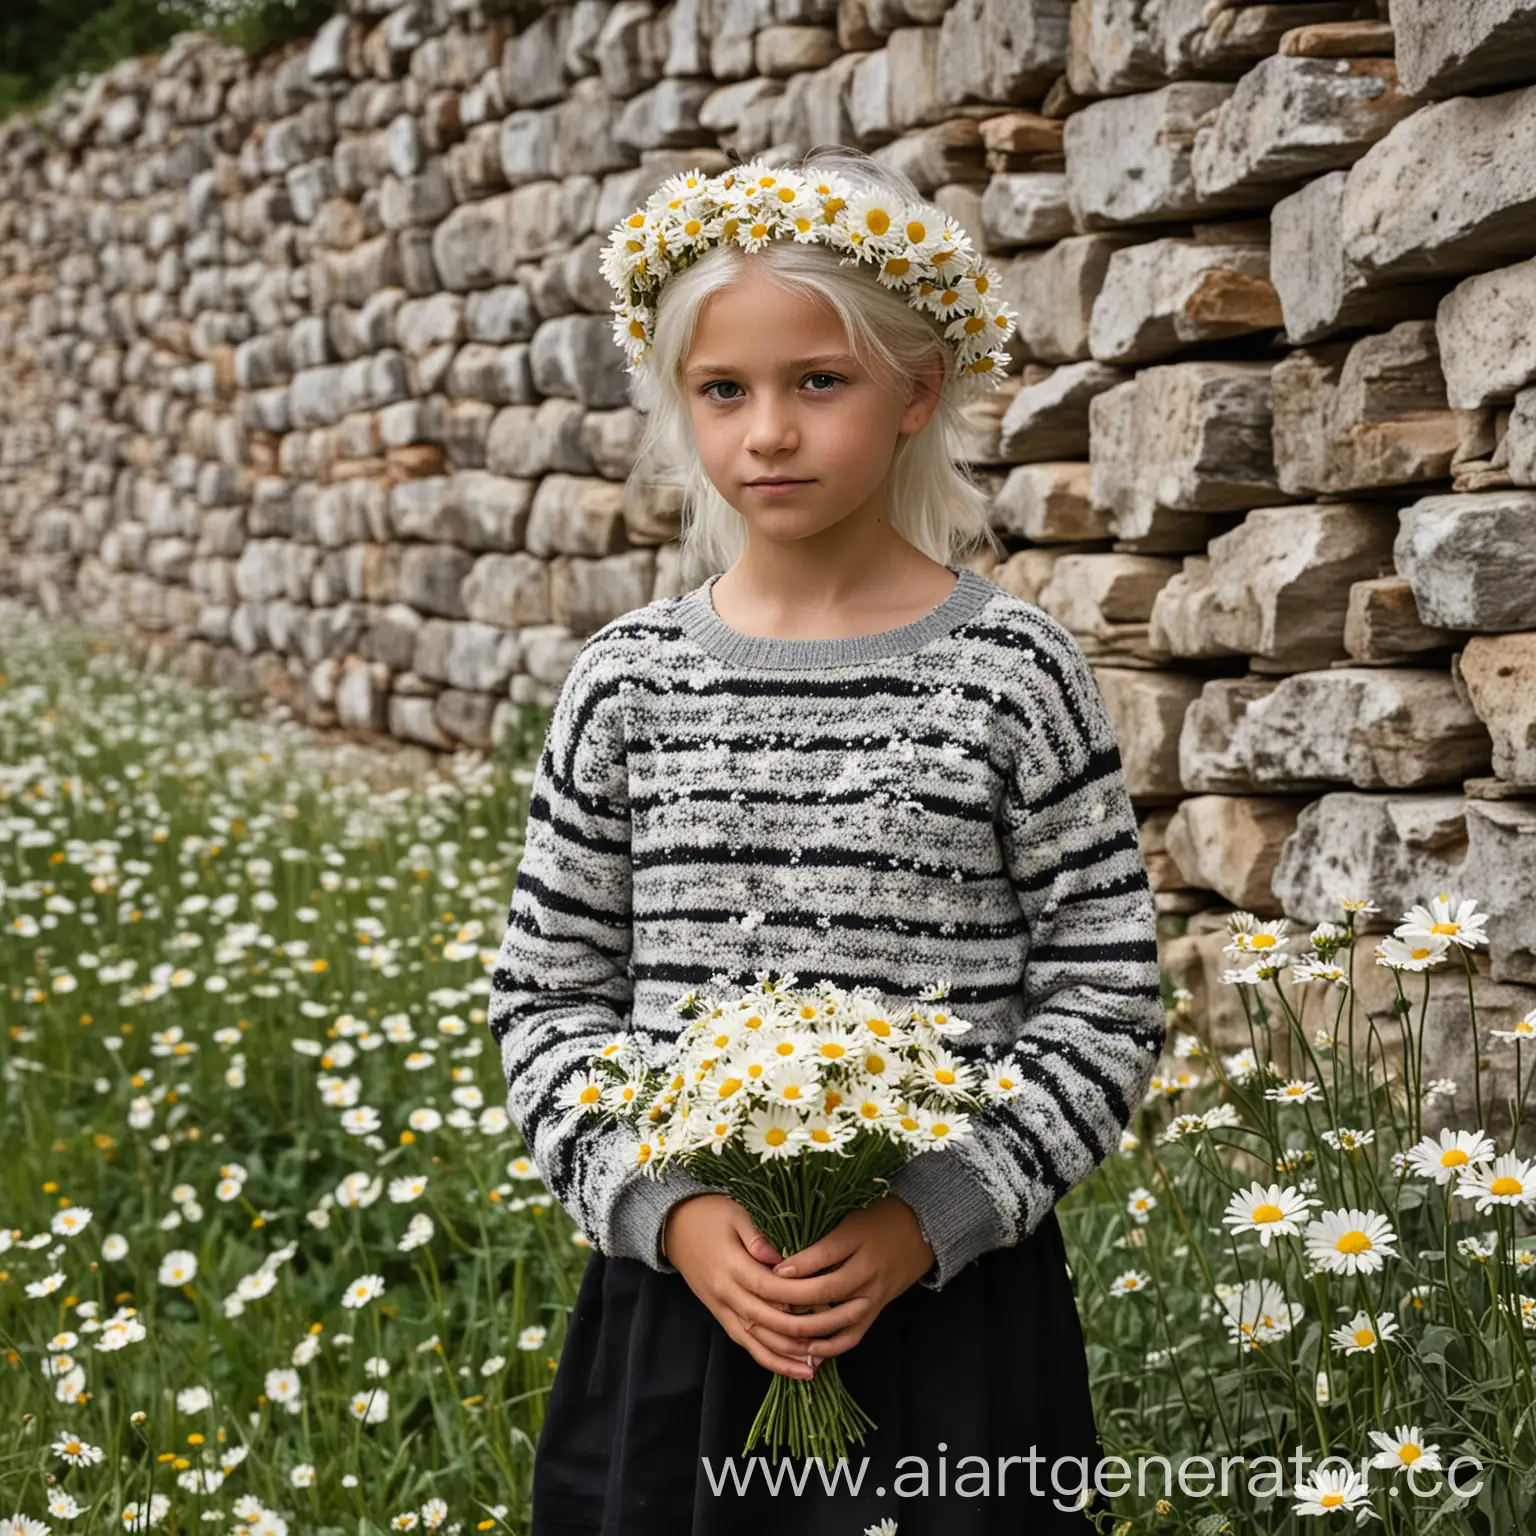 Girl-with-White-Hair-Holding-Daisy-Bouquet-in-Meadow